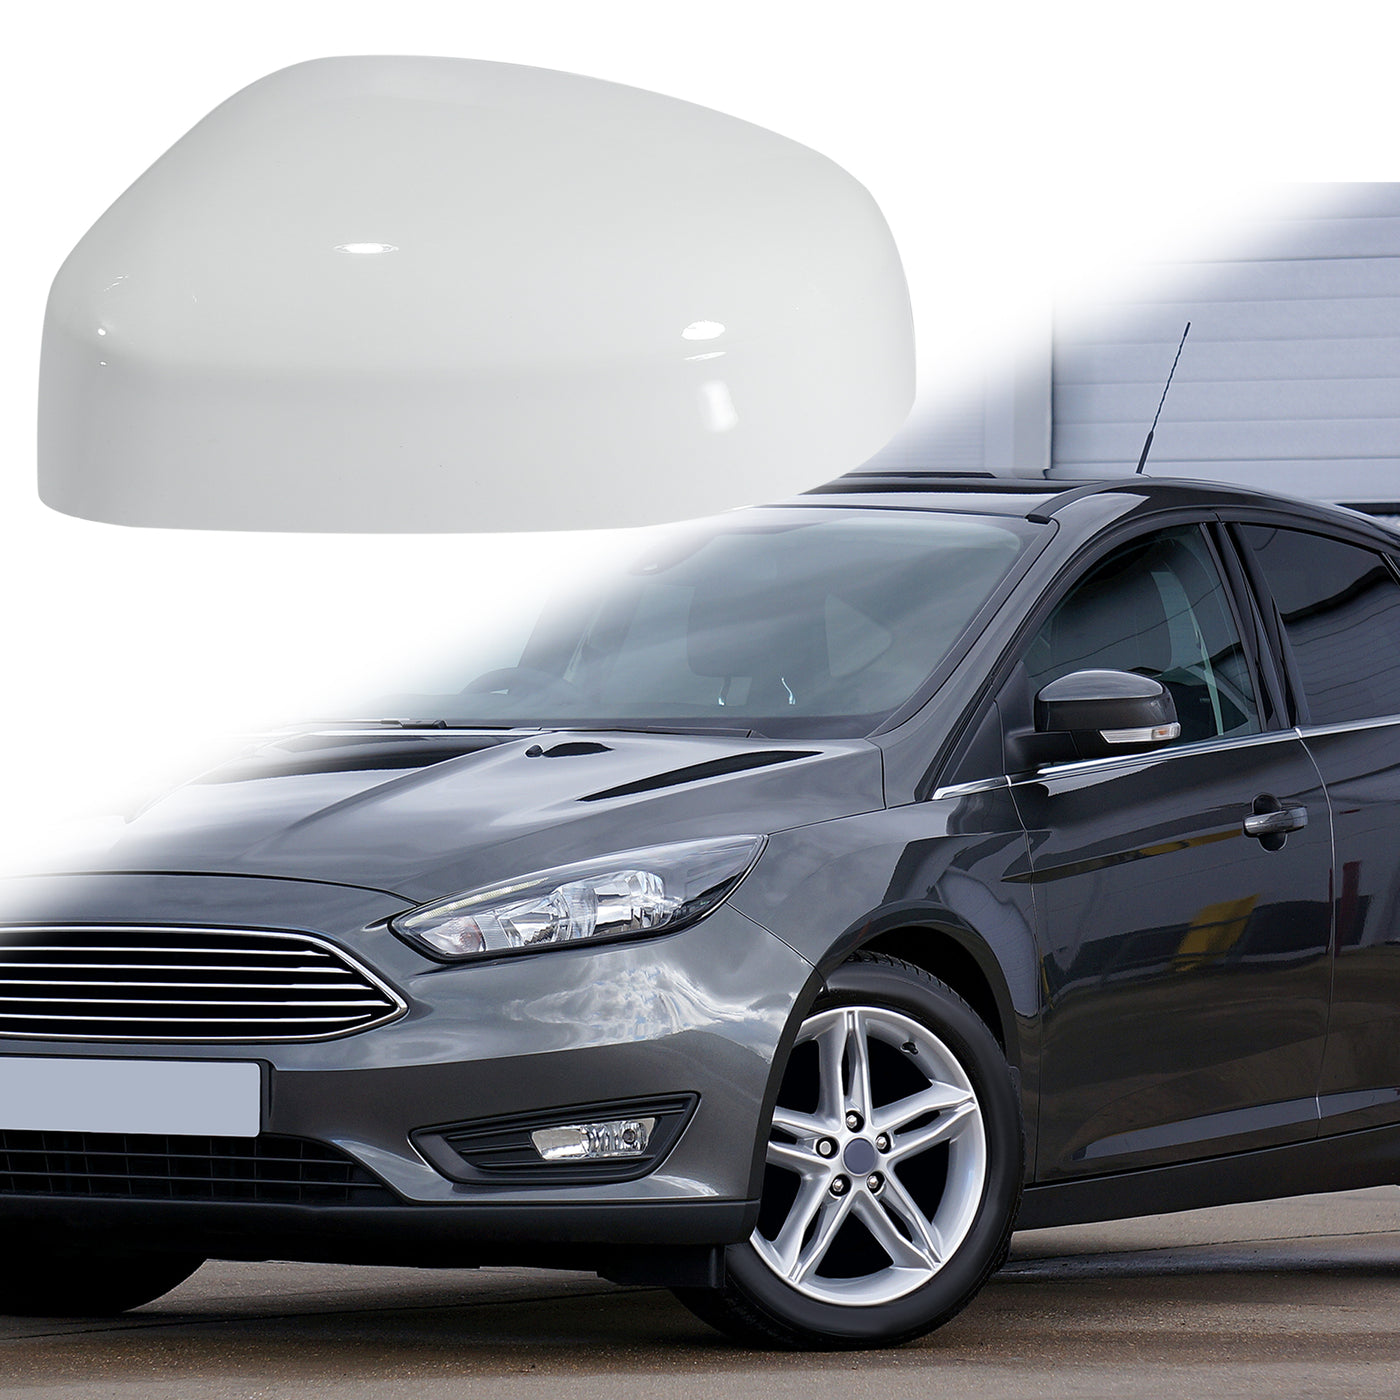 X AUTOHAUX White Left Side Car Side Door Wing Mirror Cover Rear View Mirror Cap for Ford Focus MK2 Facelift 2008-2011 for Ford Focus MK3 2012-2017